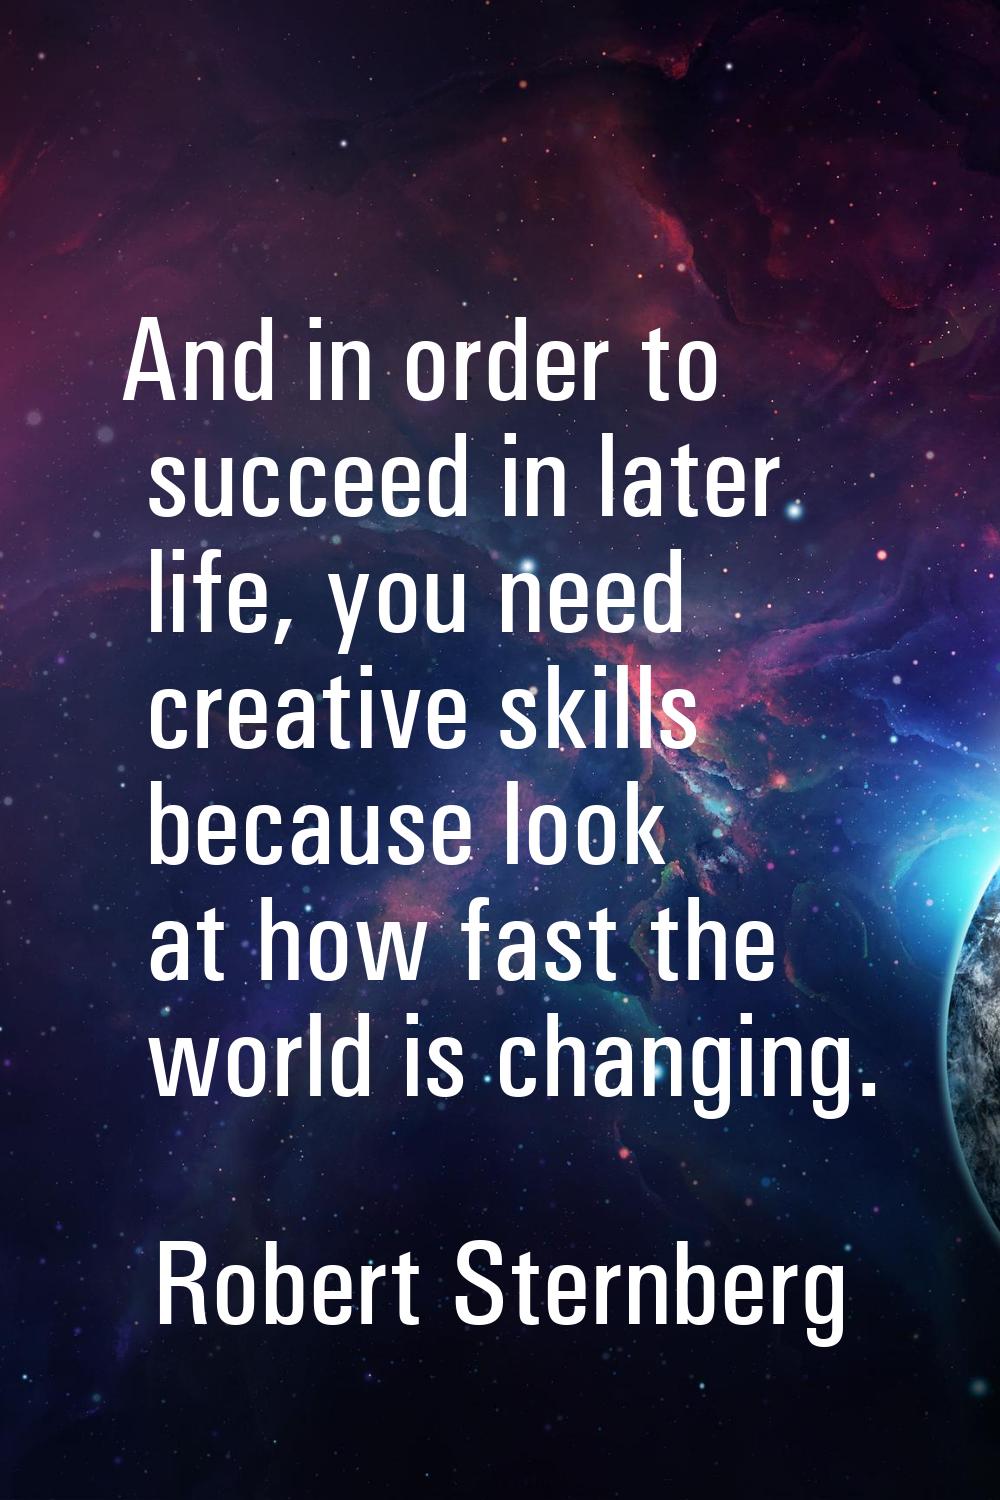 And in order to succeed in later life, you need creative skills because look at how fast the world 